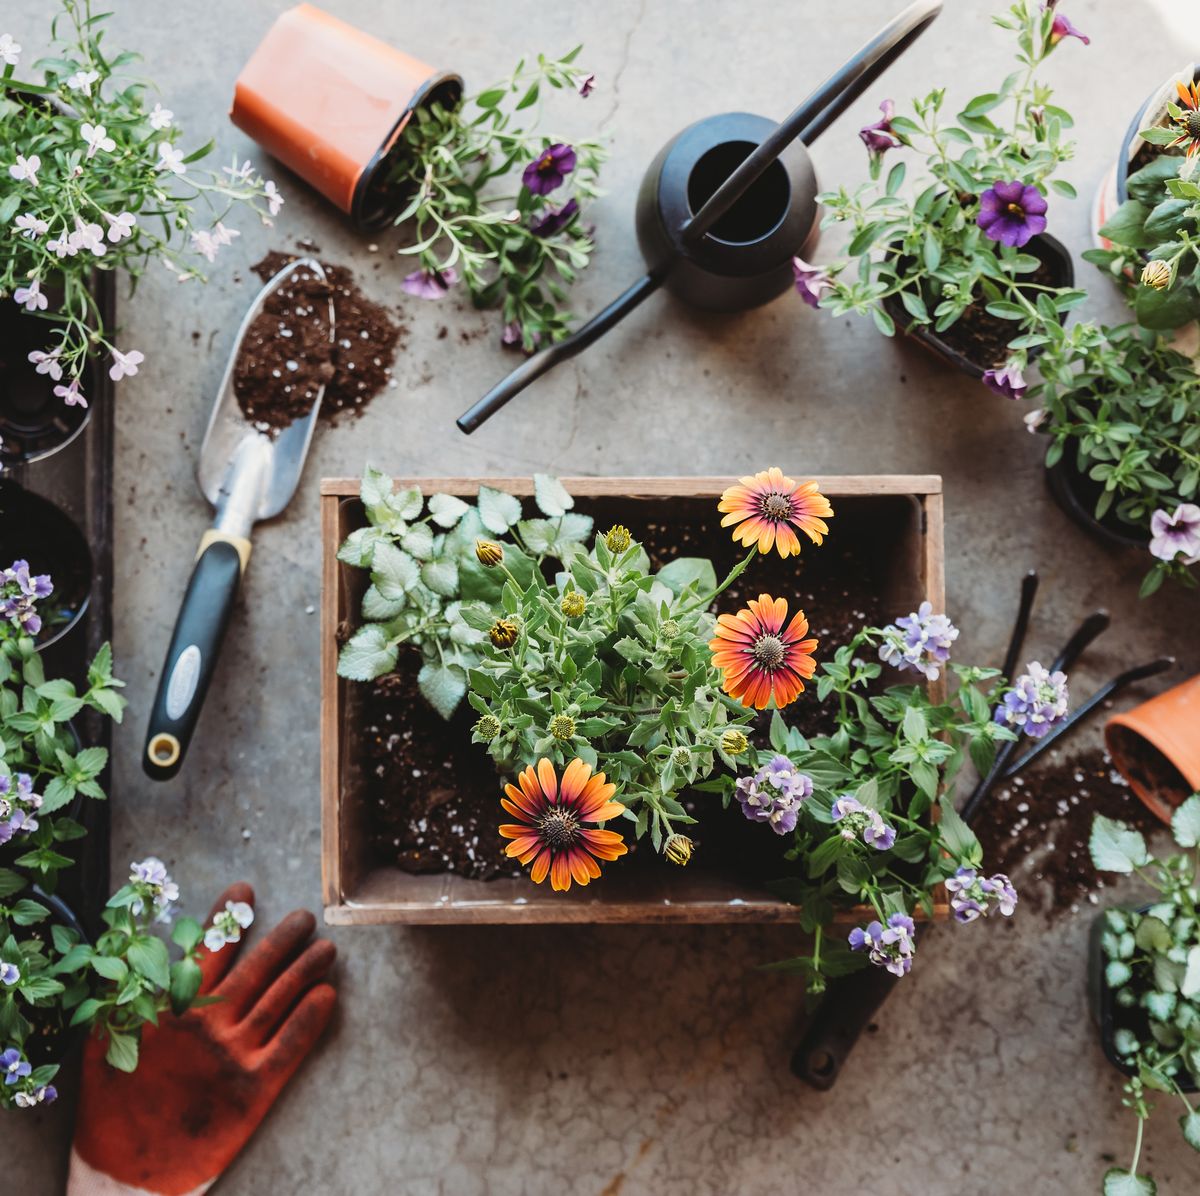 Container Gardening for Beginners